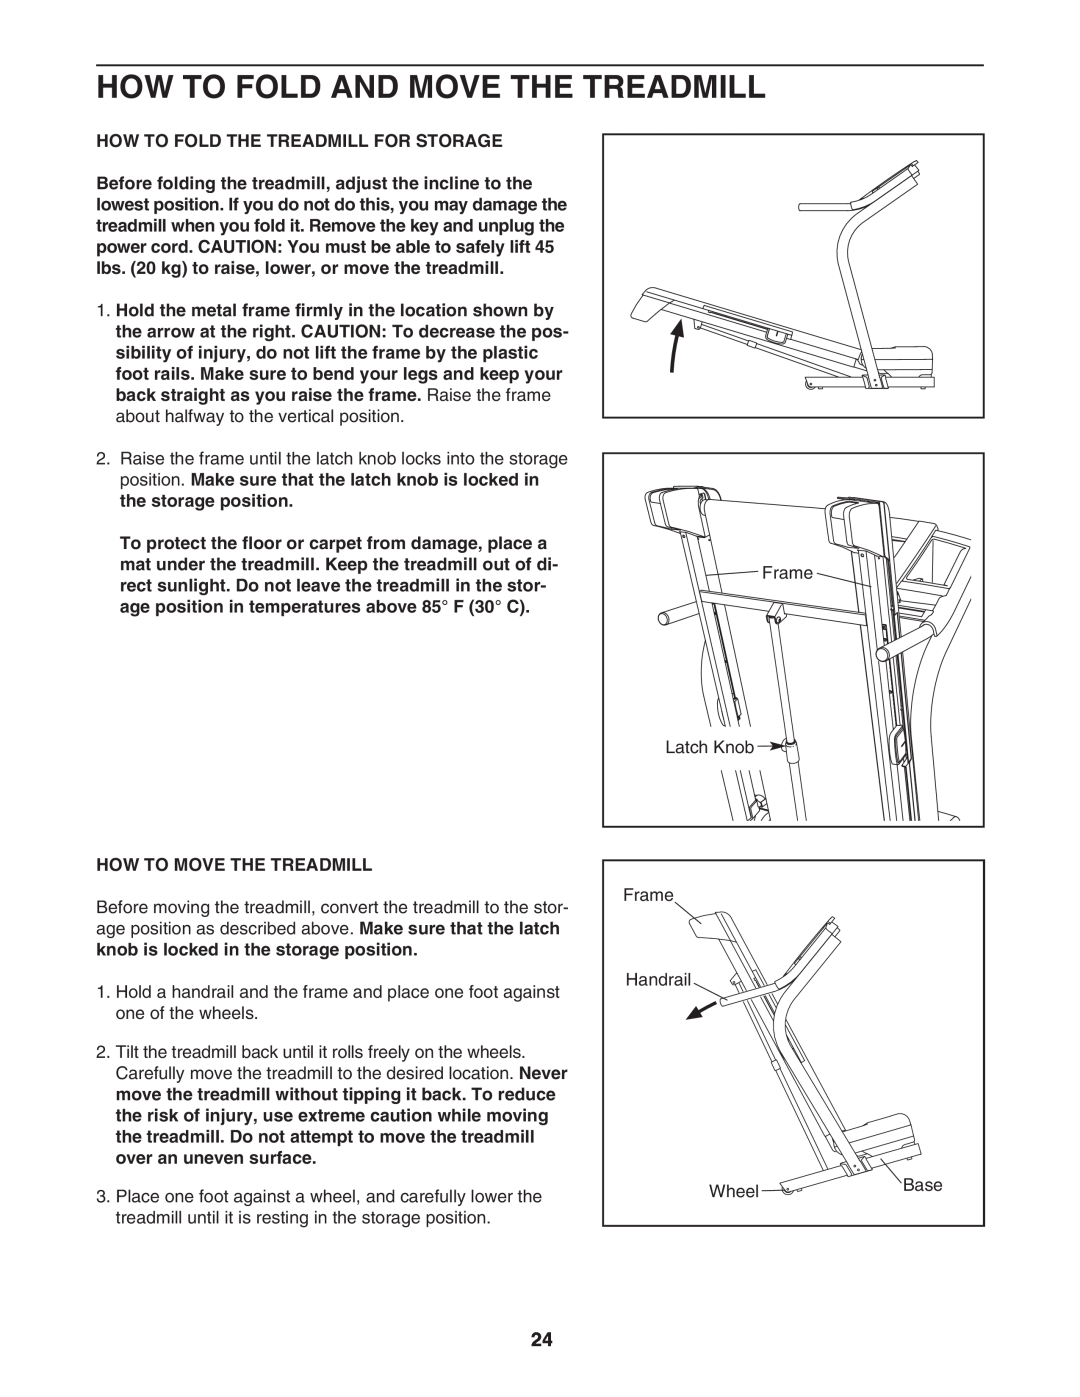 NordicTrack NTL09007.0 user manual How To Fold And Move The Treadmill, How To Fold The Treadmill For Storage 